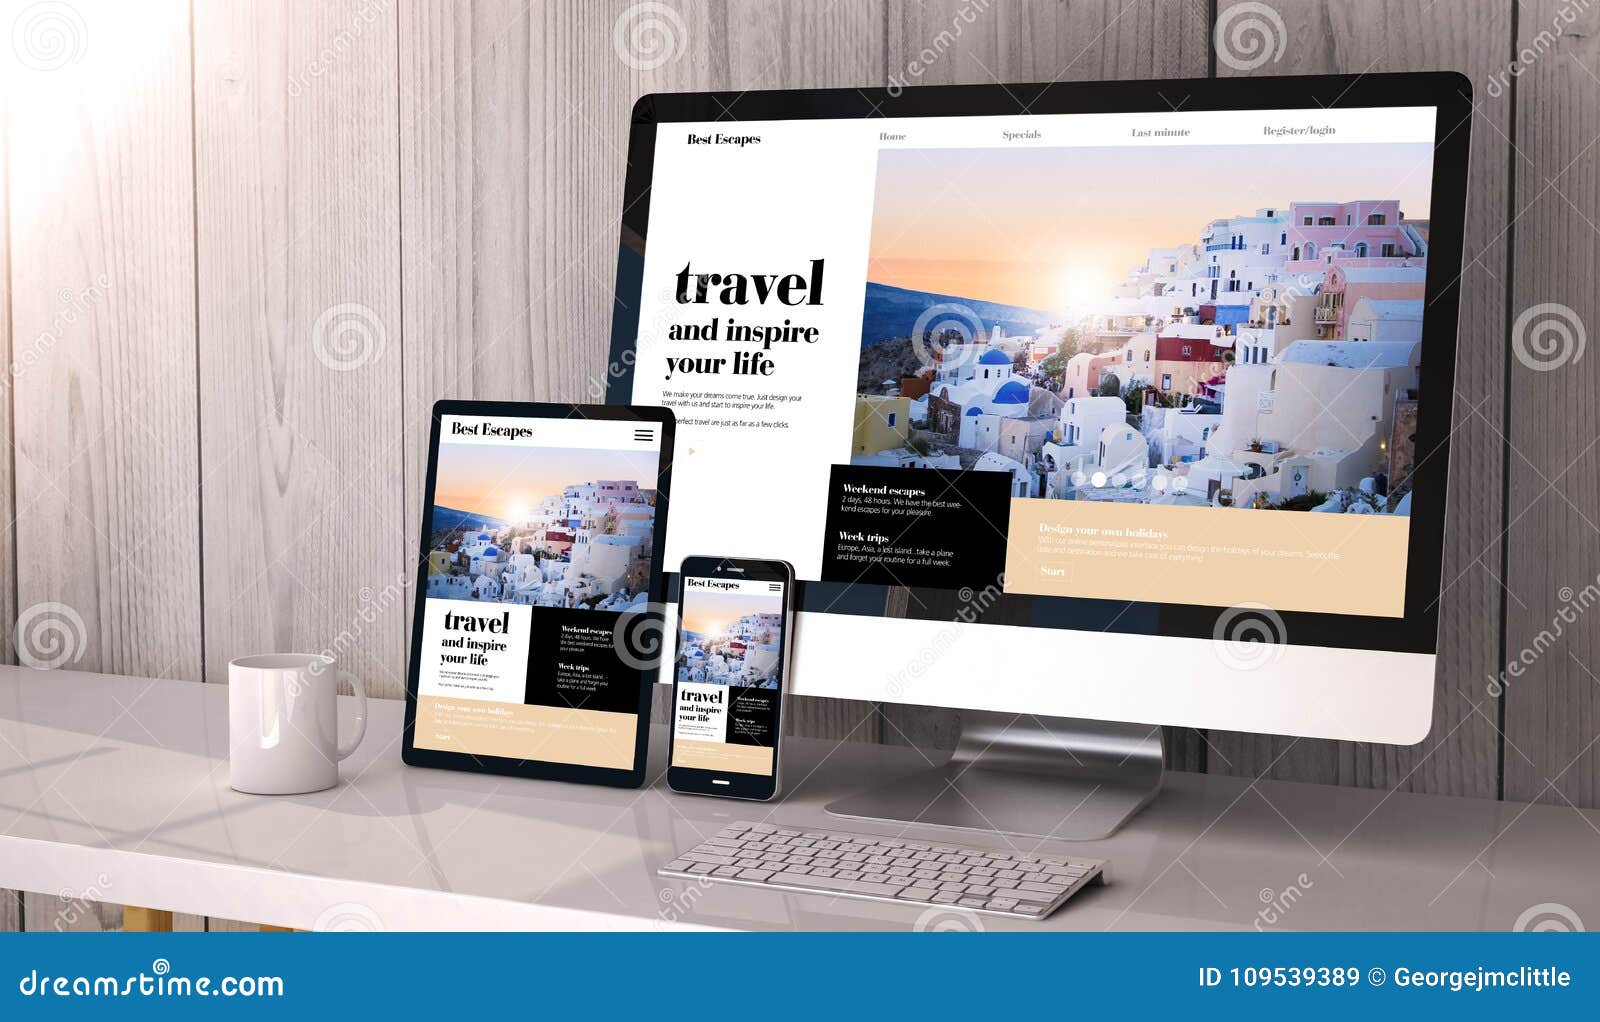 devices responsive on workspace travel website 